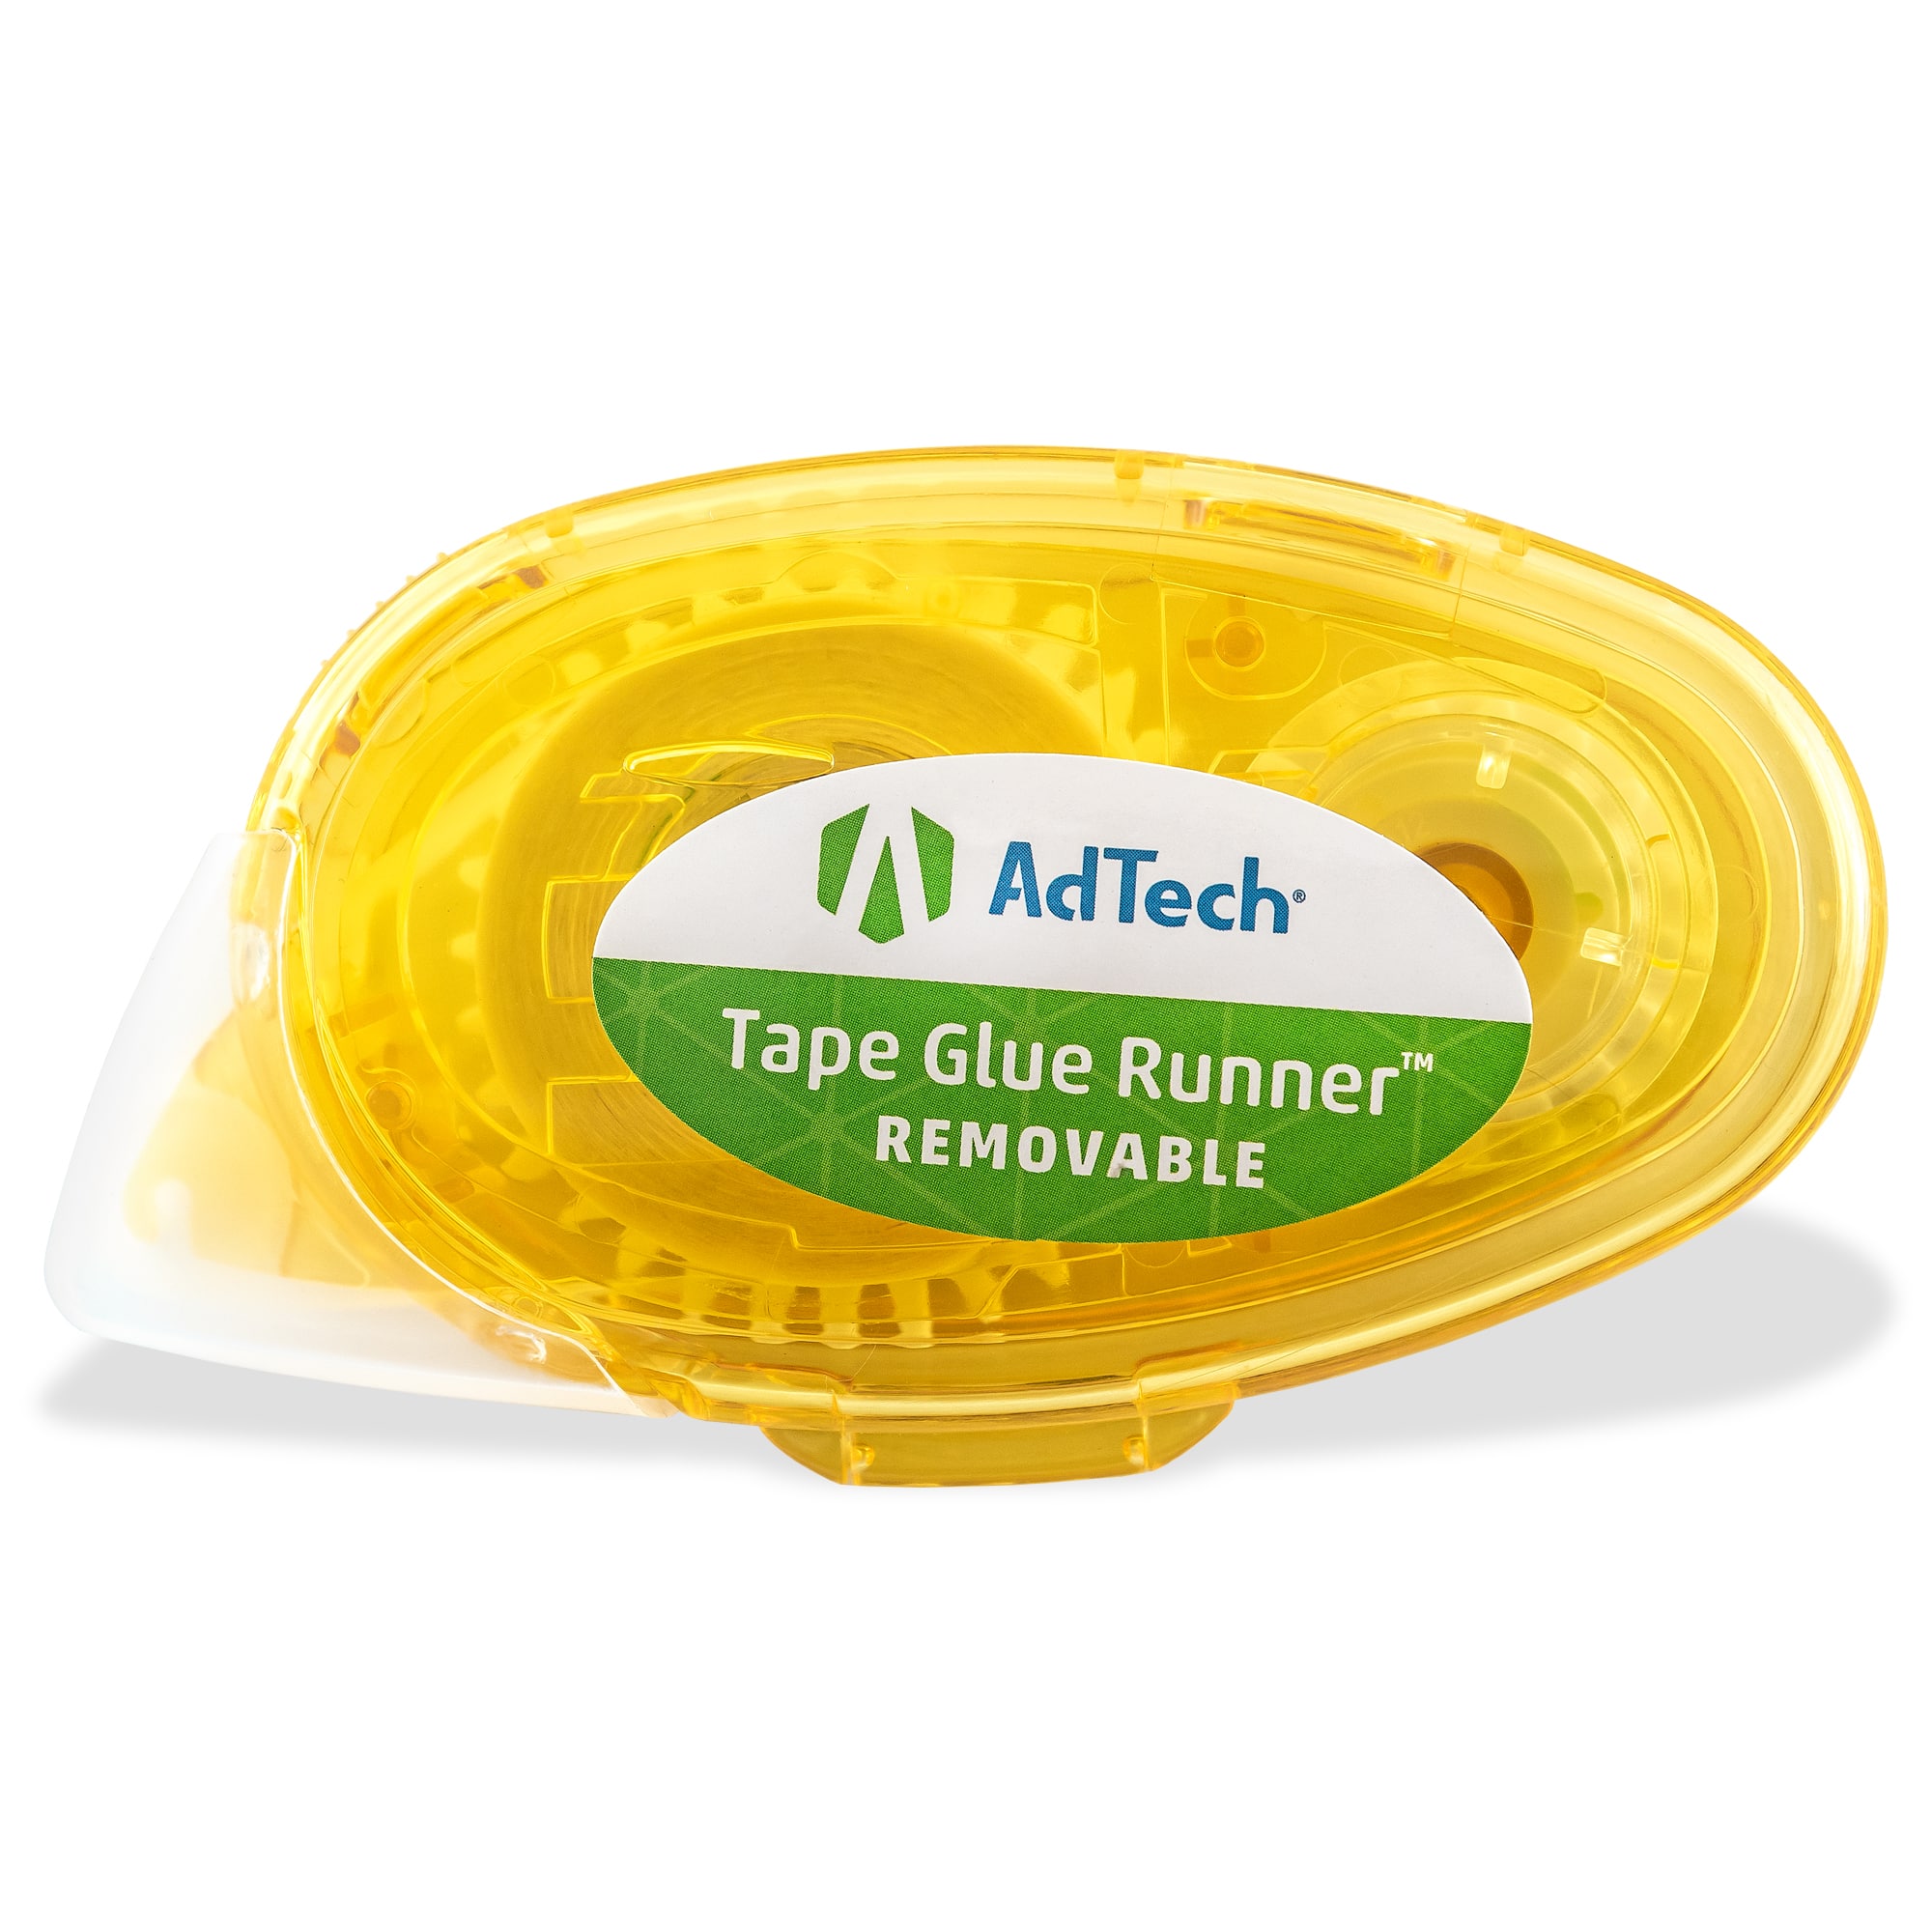 Adtech Crafter's Tape Removable Glue Runner.31X315 for Tape Runner  05632,Green,yellow